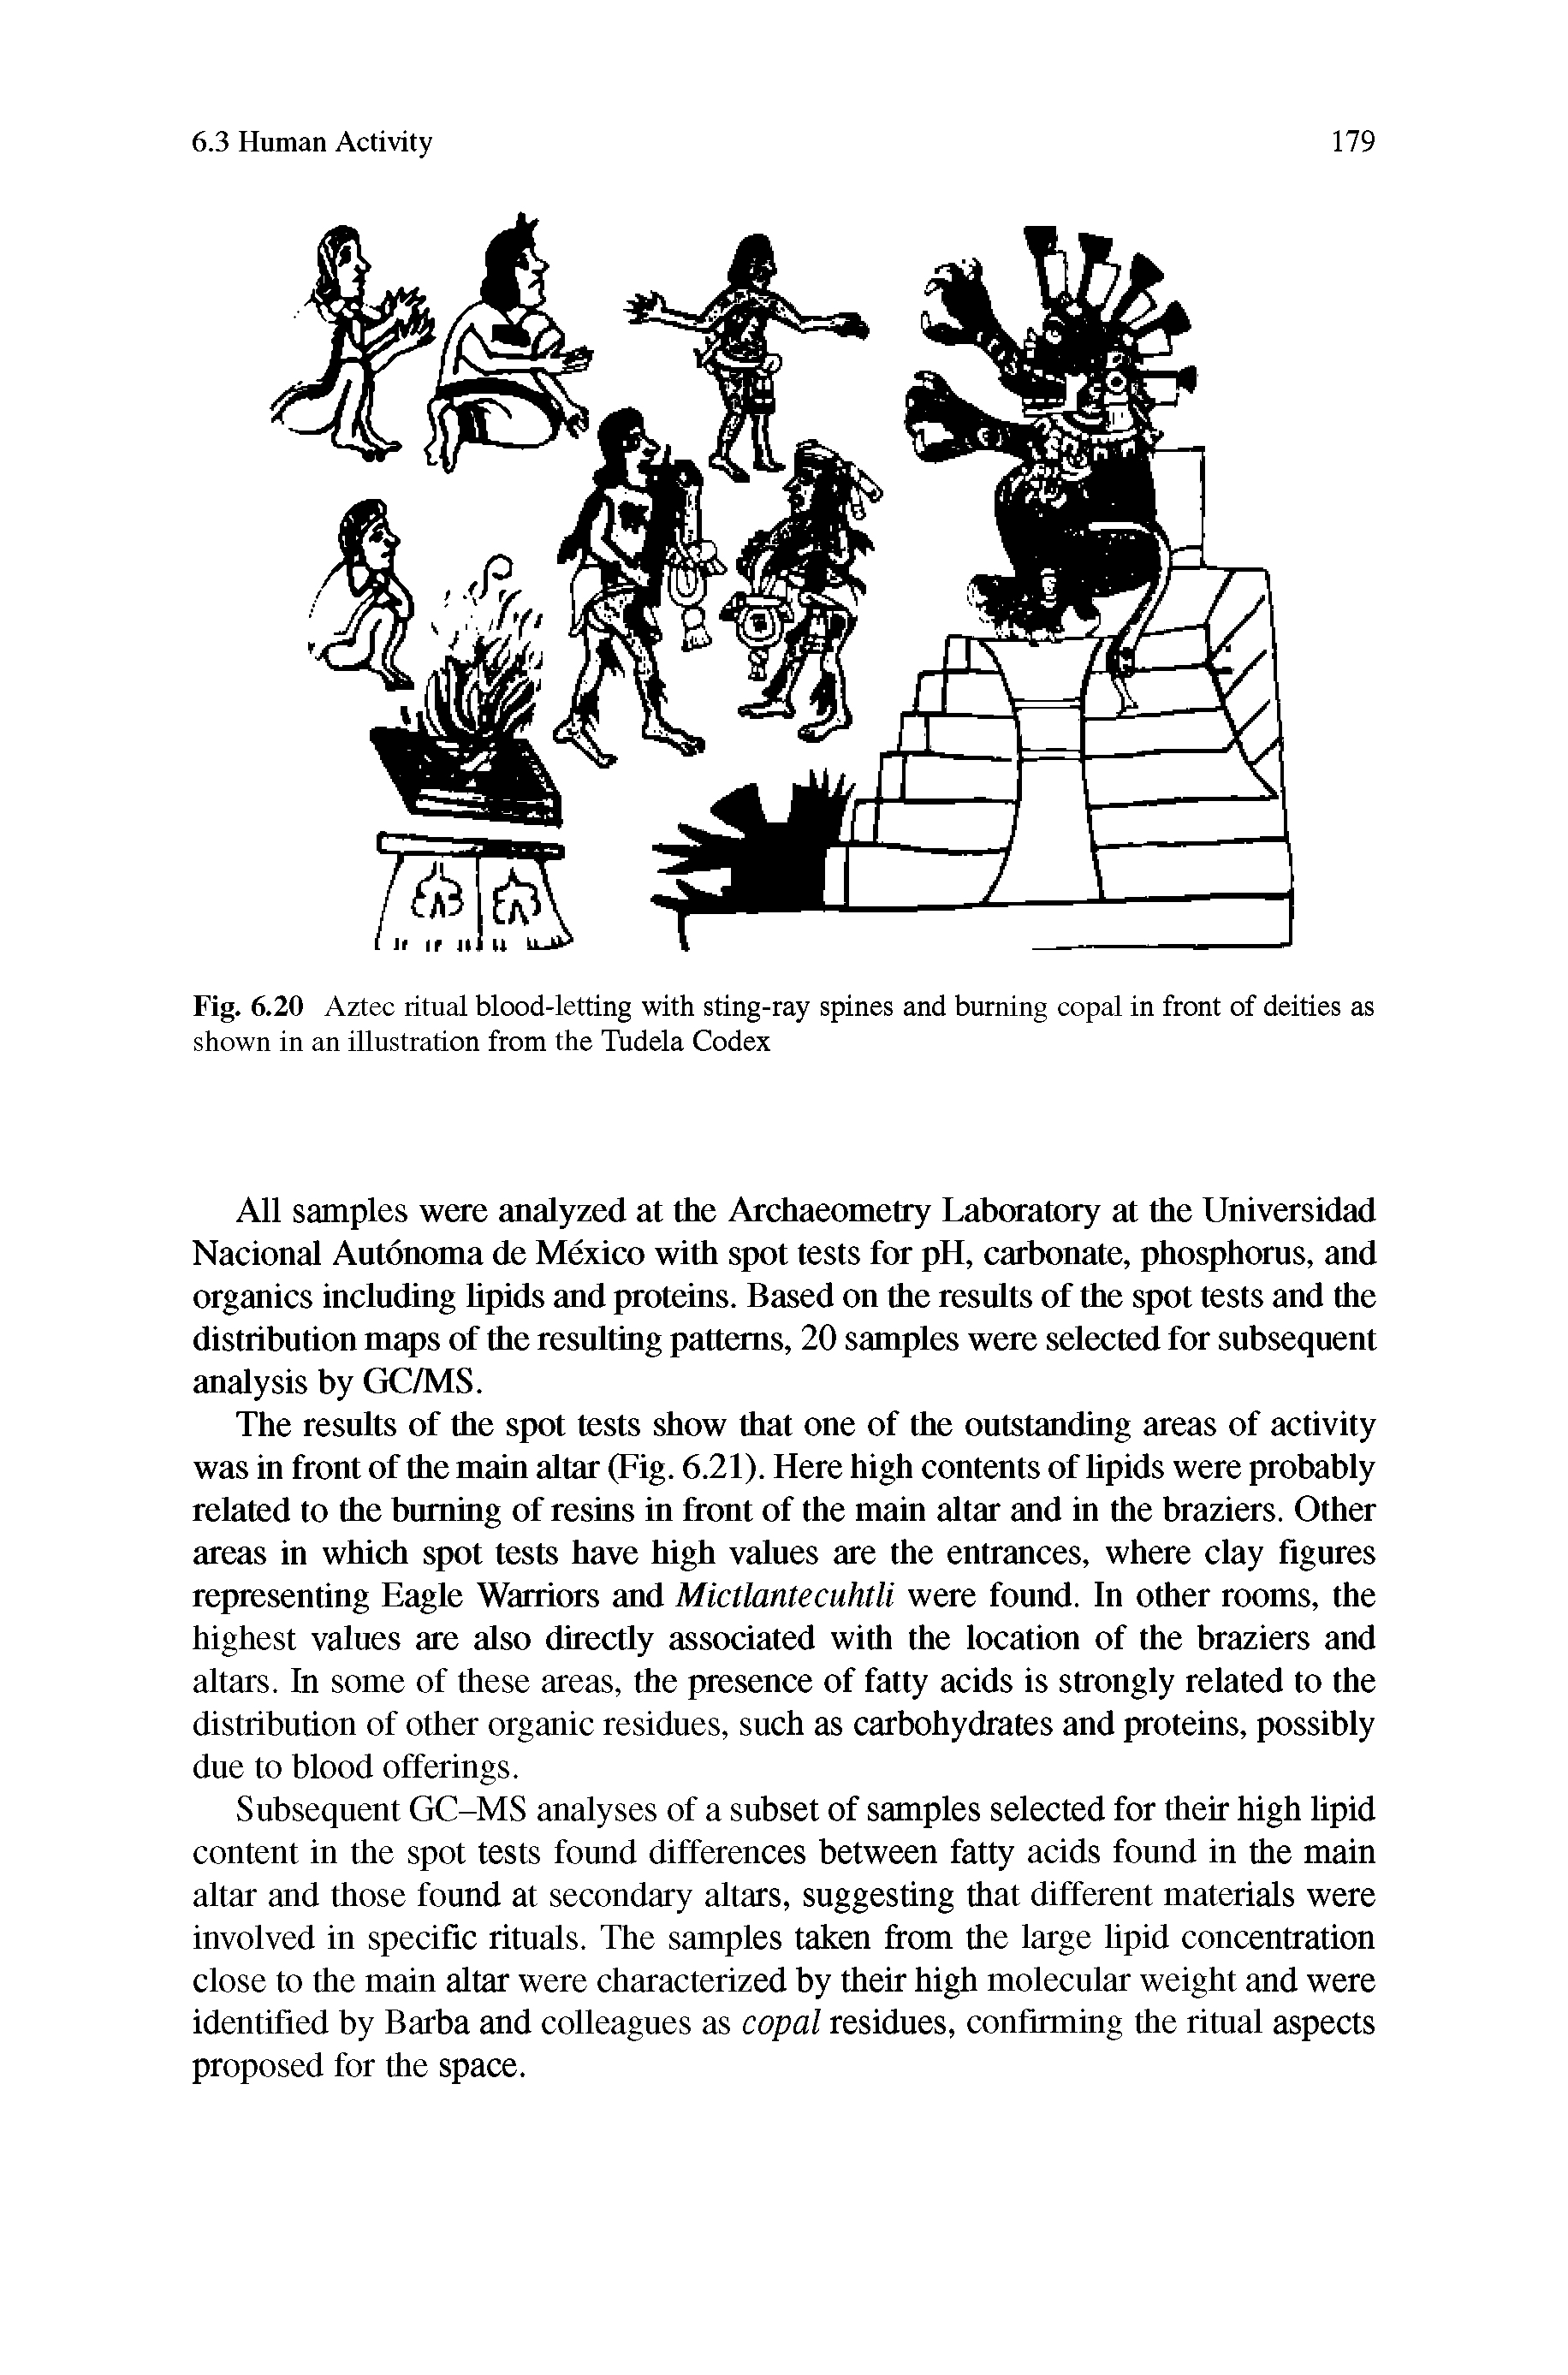 Fig. 6.20 Aztec ritual blood-letting with sting-ray spines and burning copal in front of deities as shown in an illustration from the Tudela Codex...